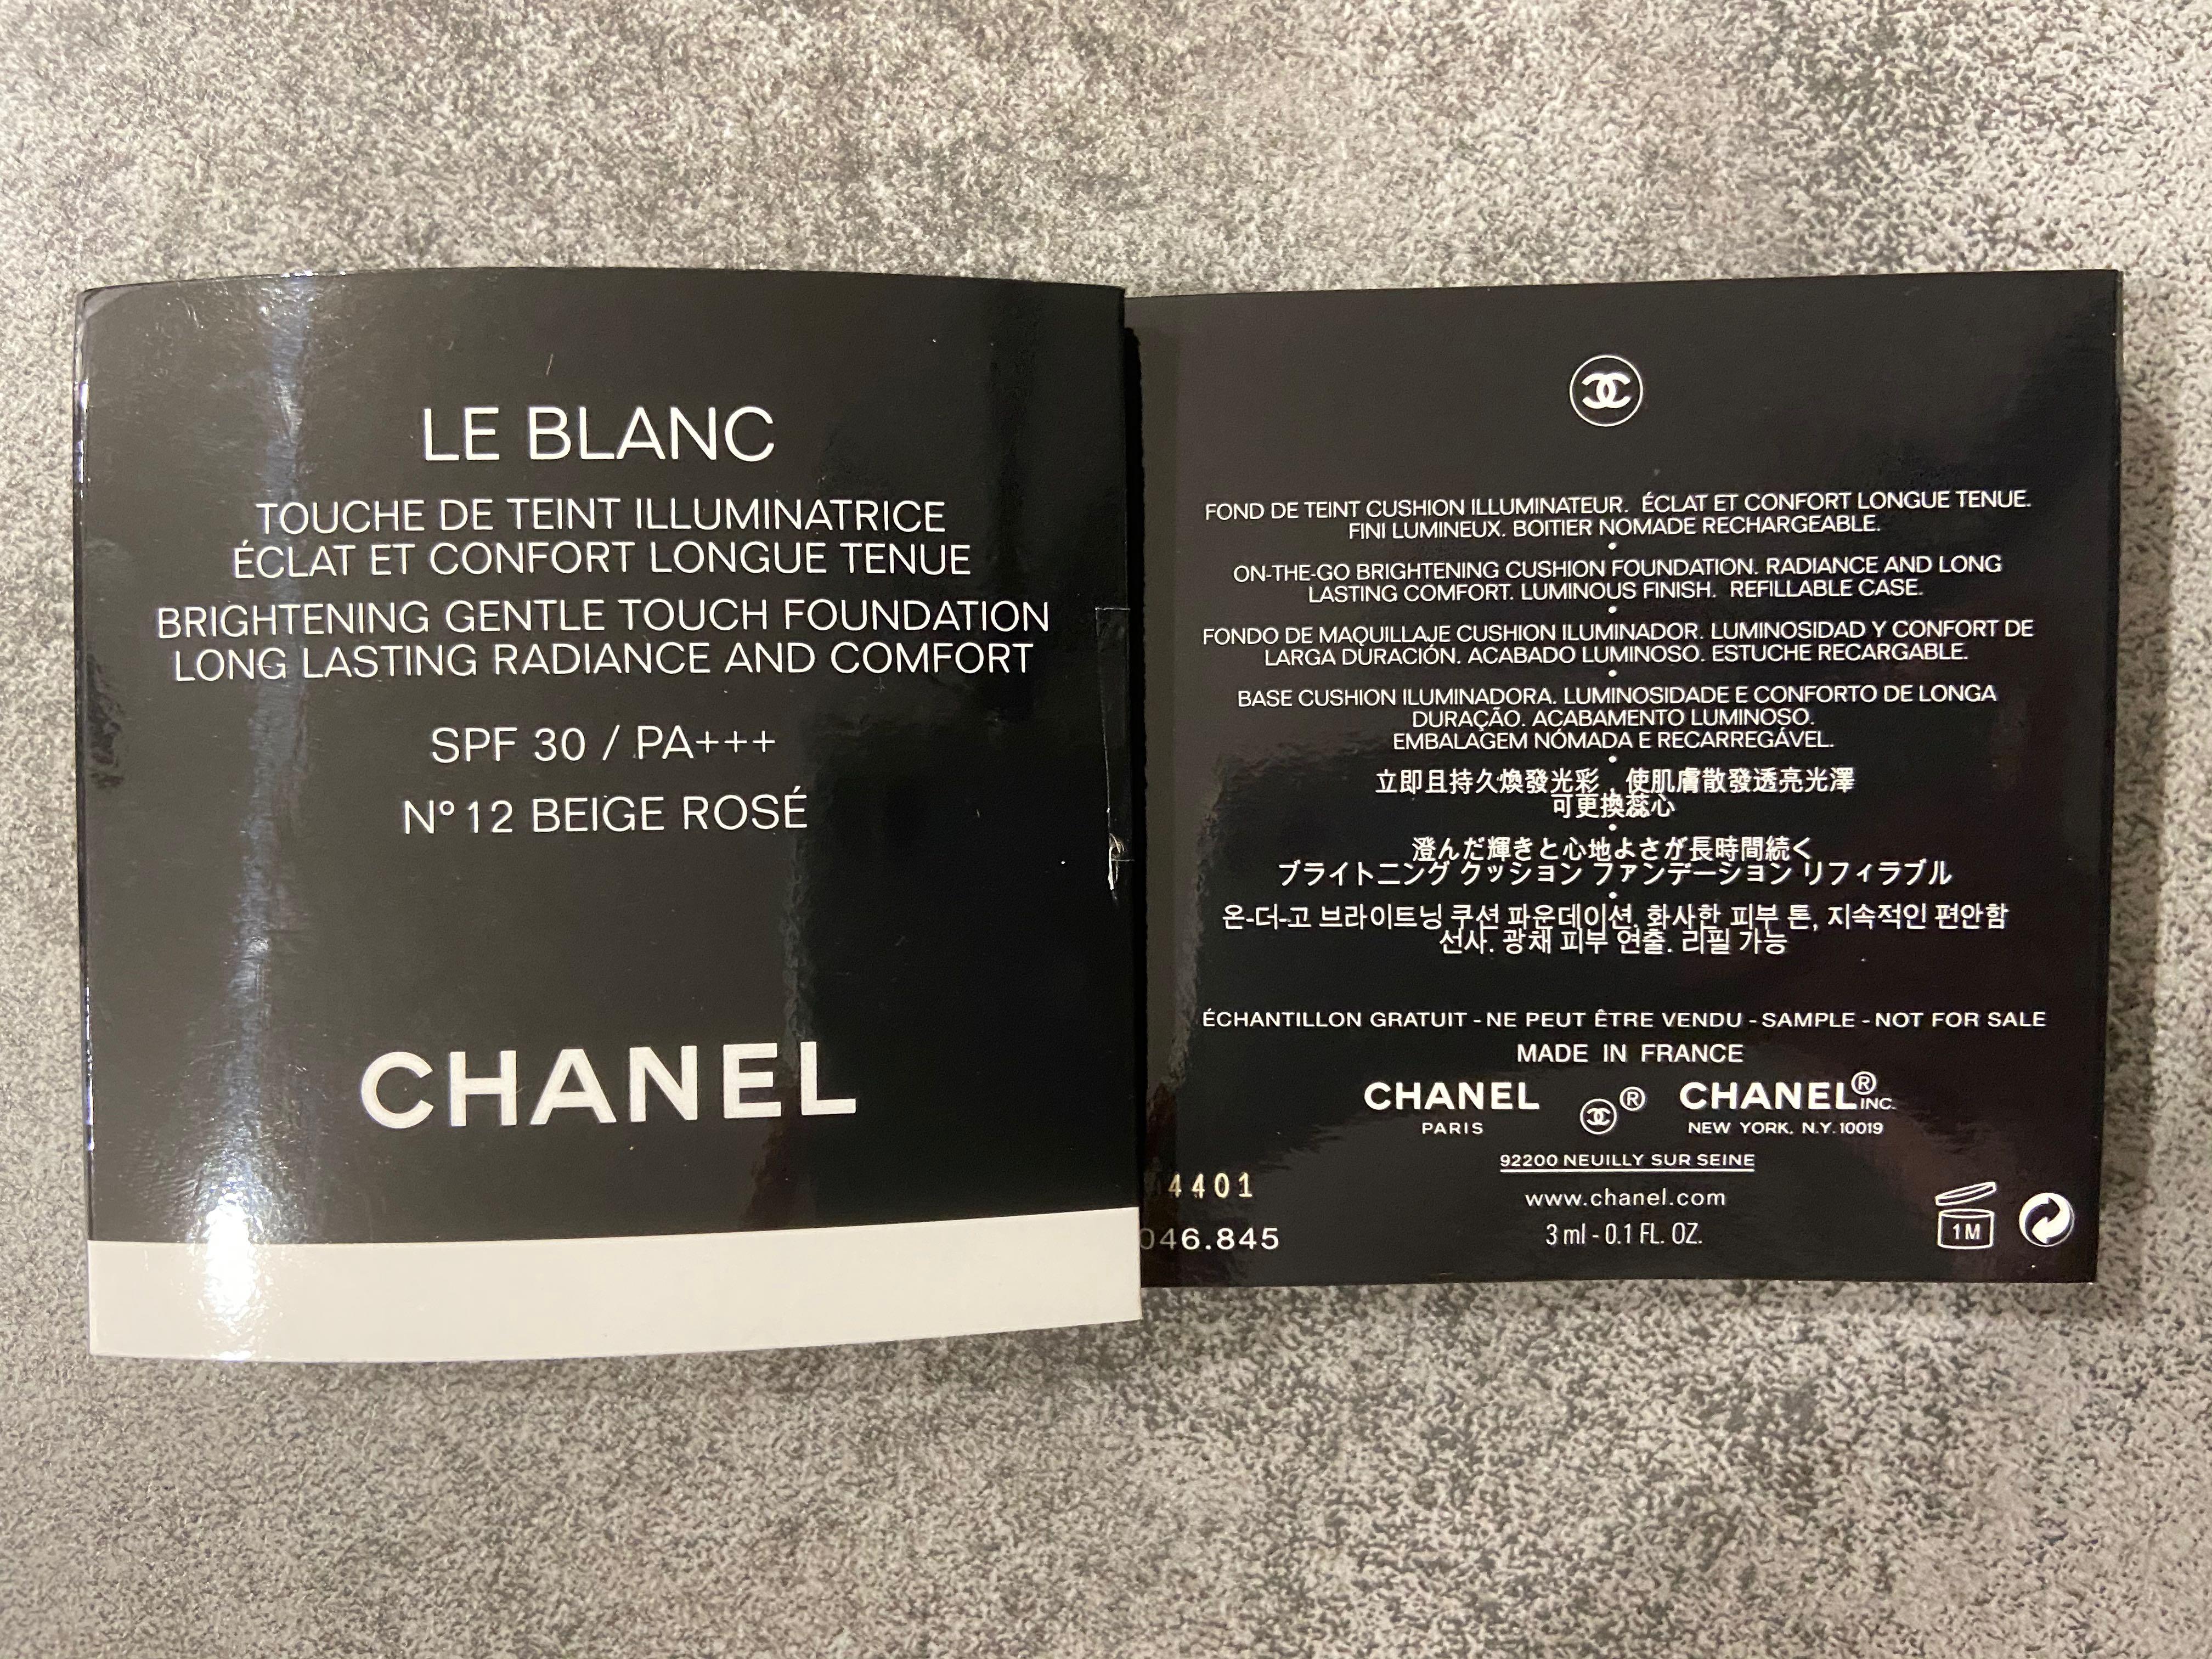 Chanel Le Blanc Brightening Gentle Touch Foundation, Beauty